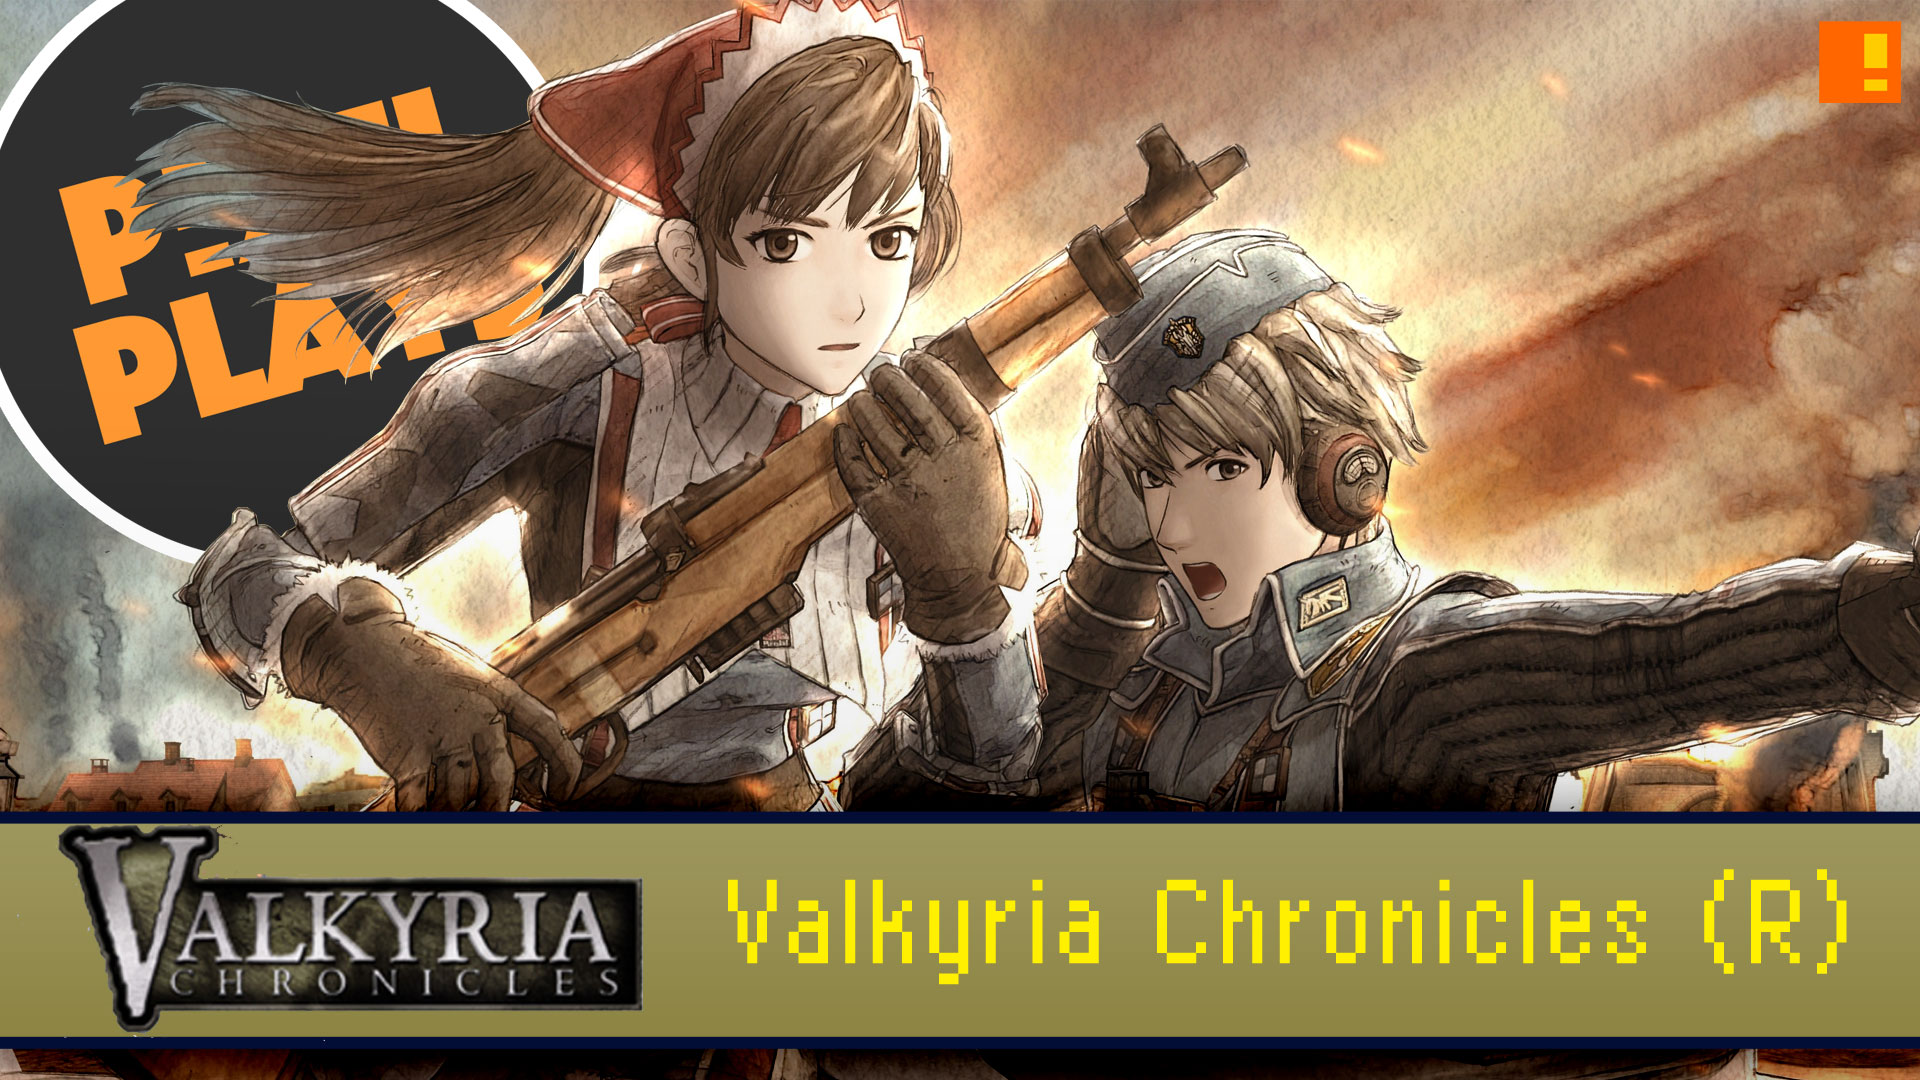 Valkyria Chronicles, Valkyria Chronicles Remastered, lets play, let's play, playstation 4, pixel plays